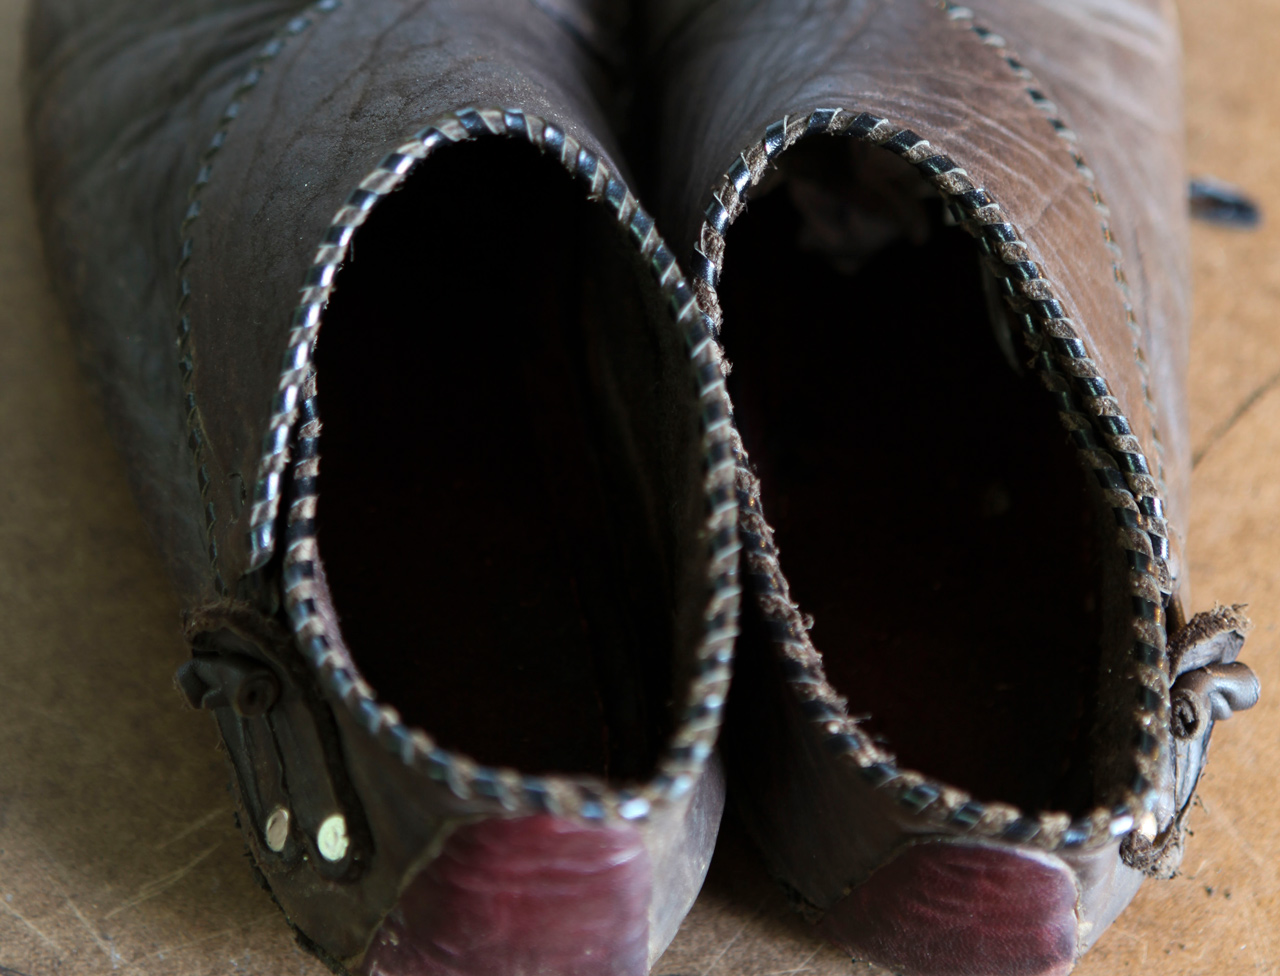 Closeup of whip stitching on a well worn pair of handmade shoes